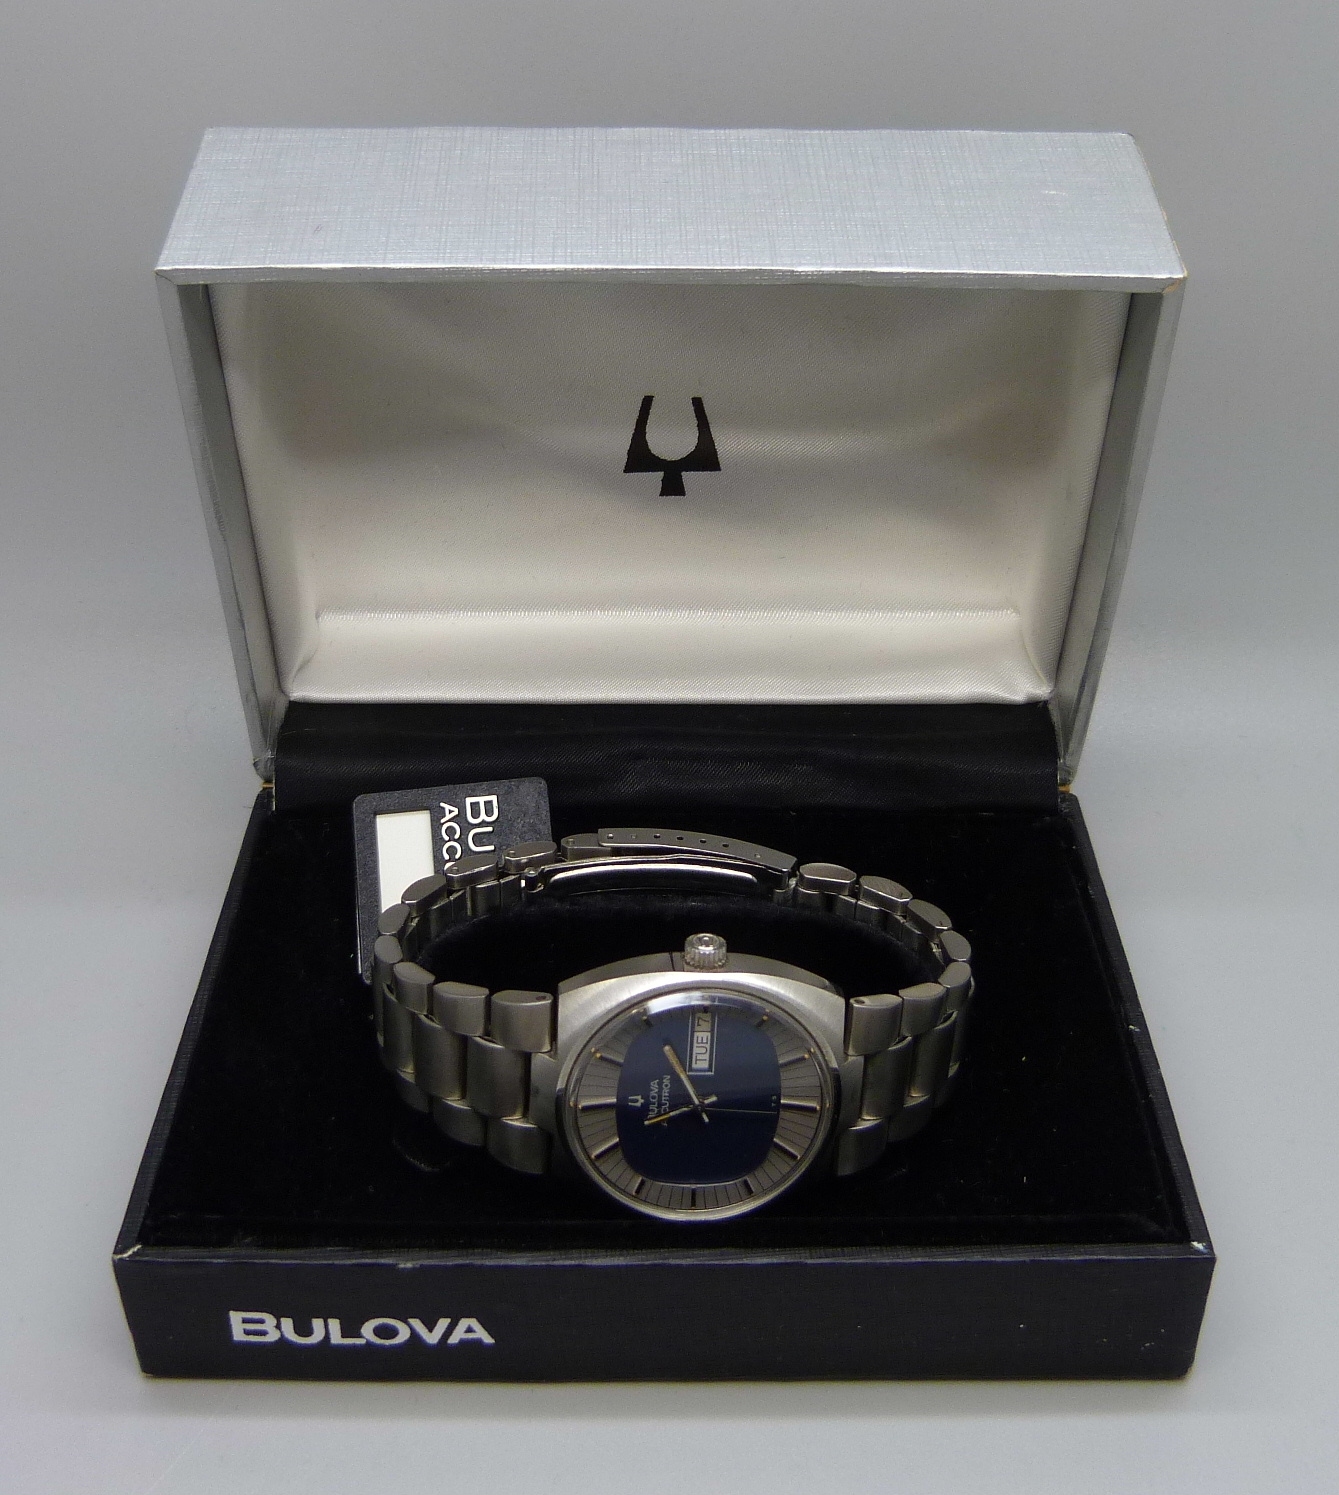 A Bulova Accutron tuning fork wristwatch, TV dial, new unused old stock with original box - Image 6 of 6